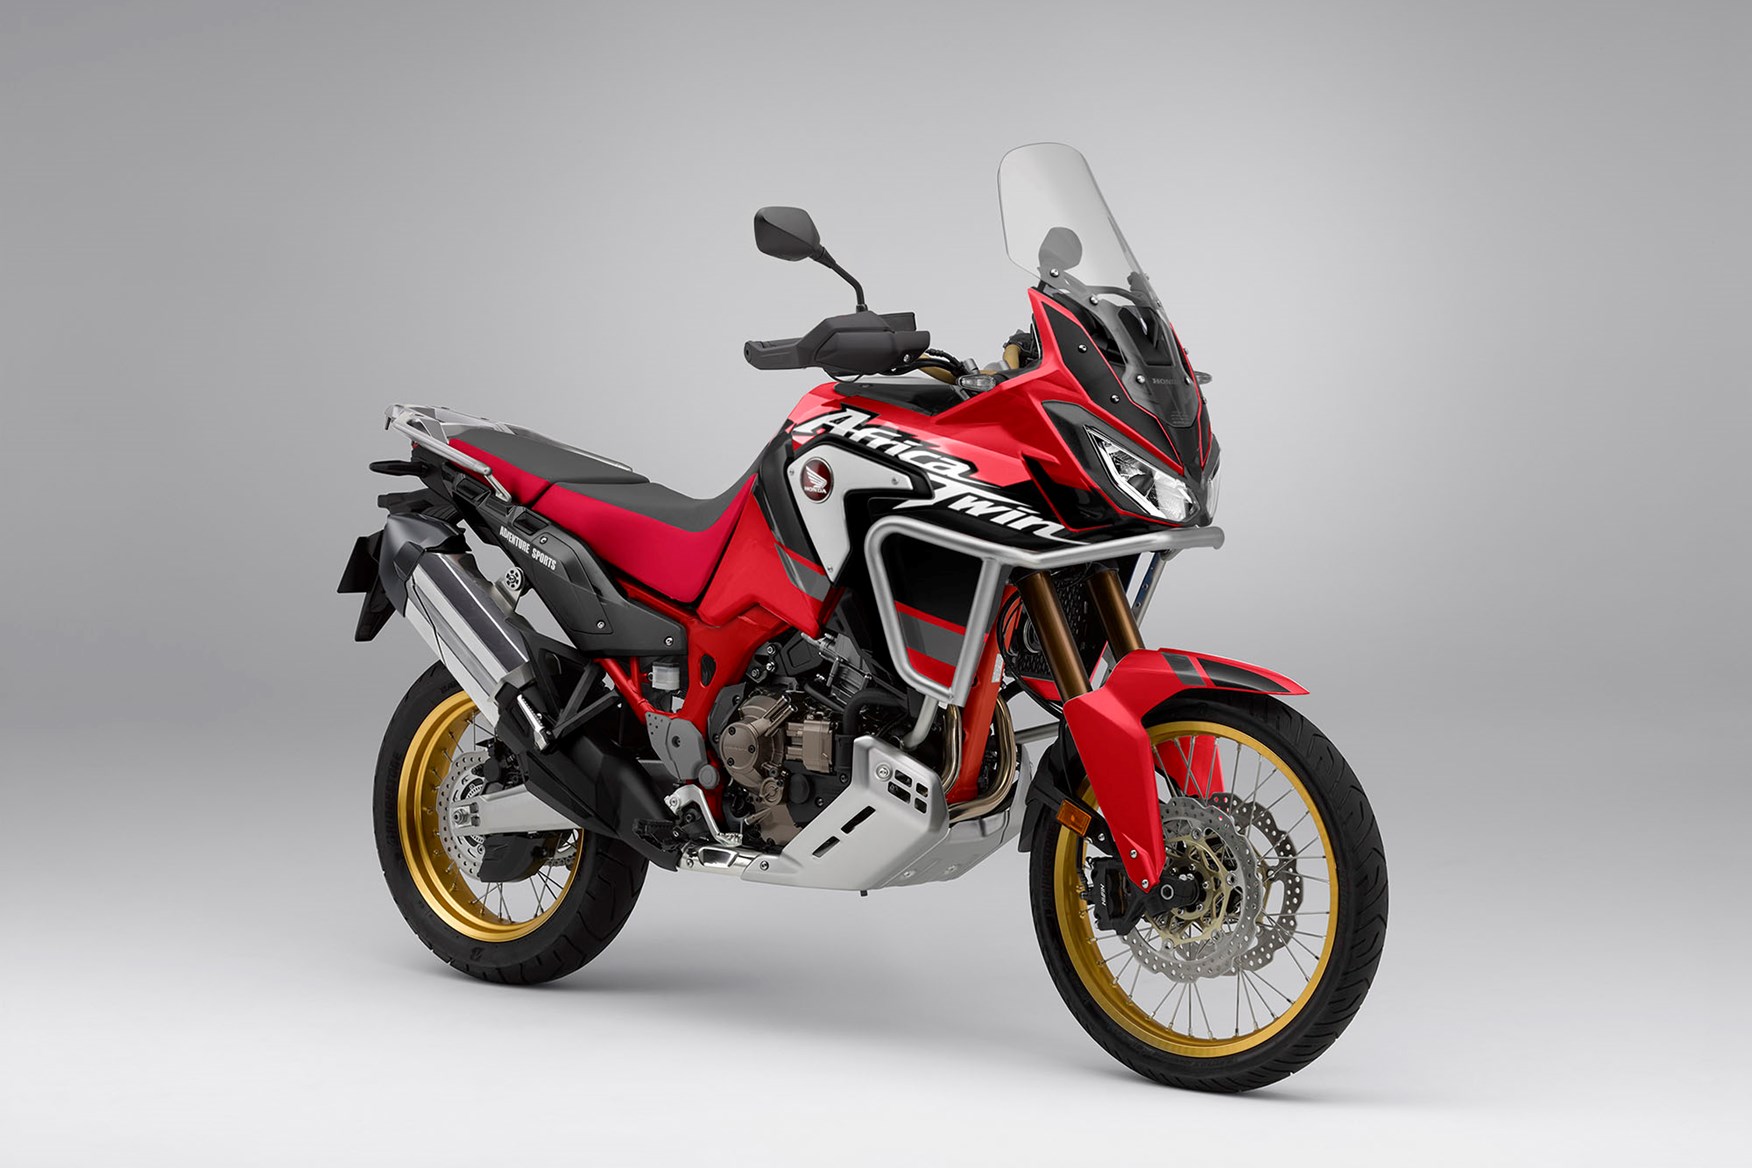 2020 Honda Africa Twin to pack more power and features